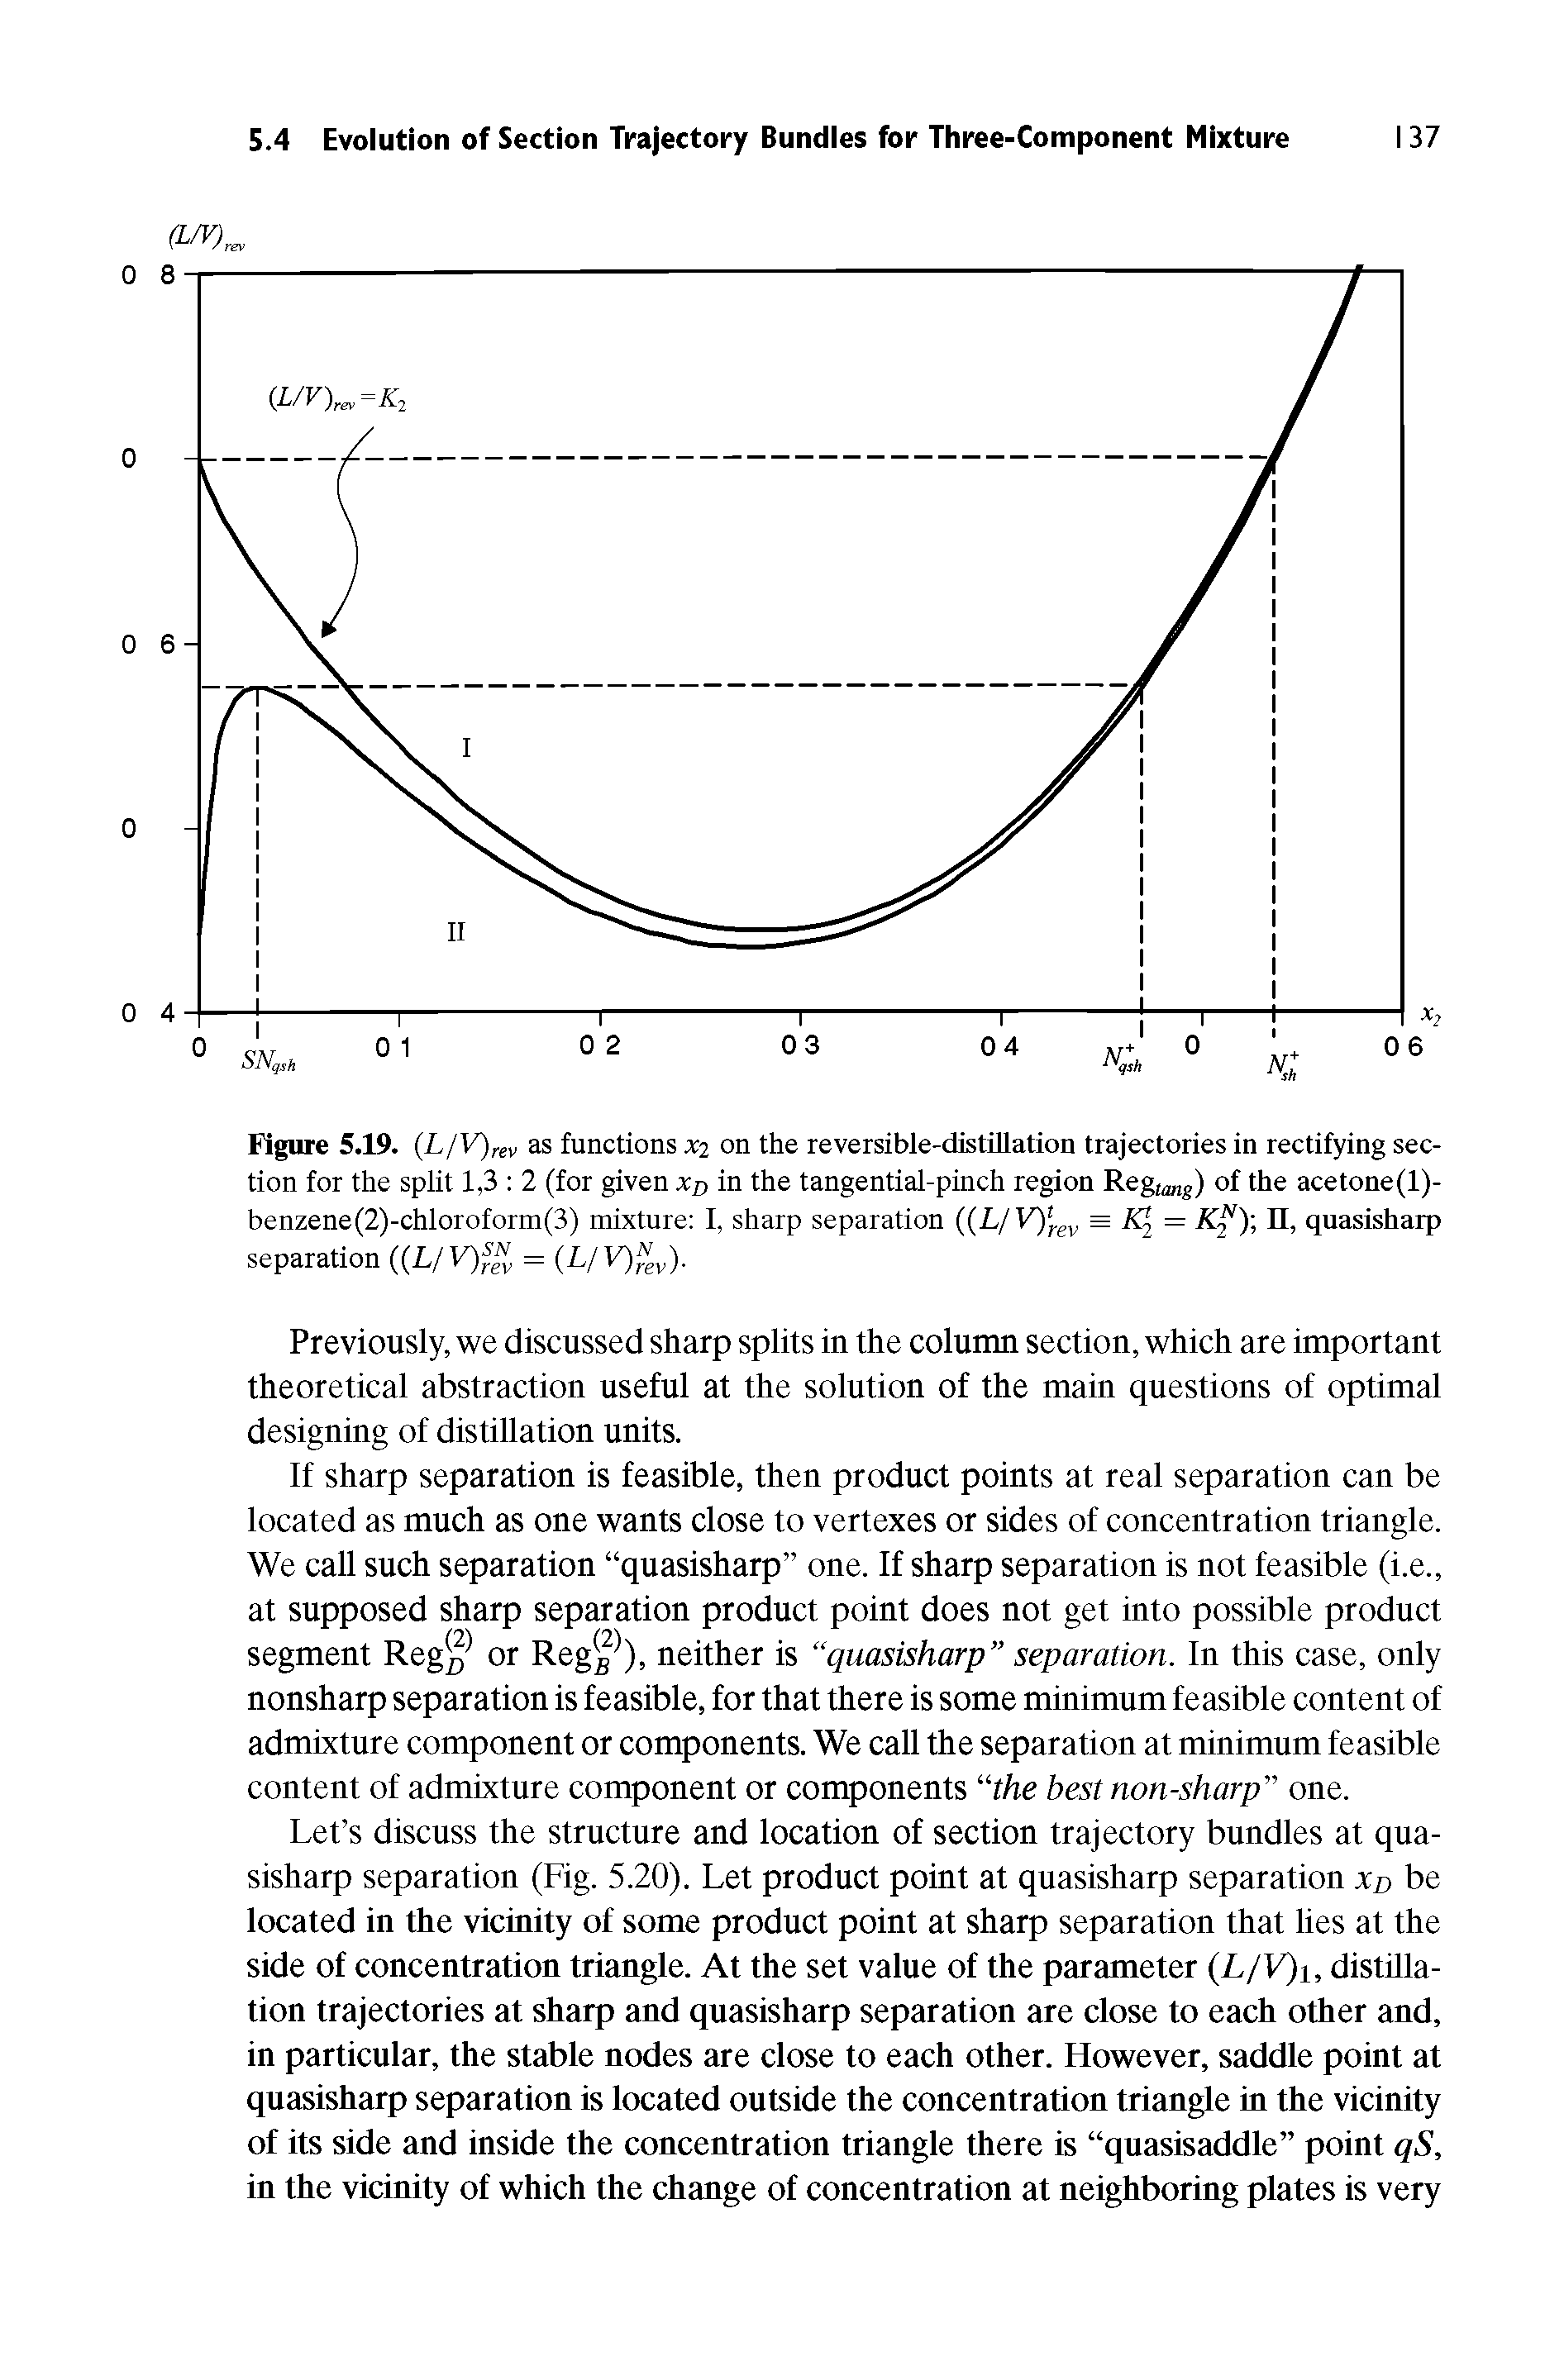 Figure 5.19. (L/V)rev as functions X2 on the reversible-distillation trajectories in rectifying section for the split 1,3 2 (for given xo in the tangential-pinch region Regu g) of the acetone(l)-...